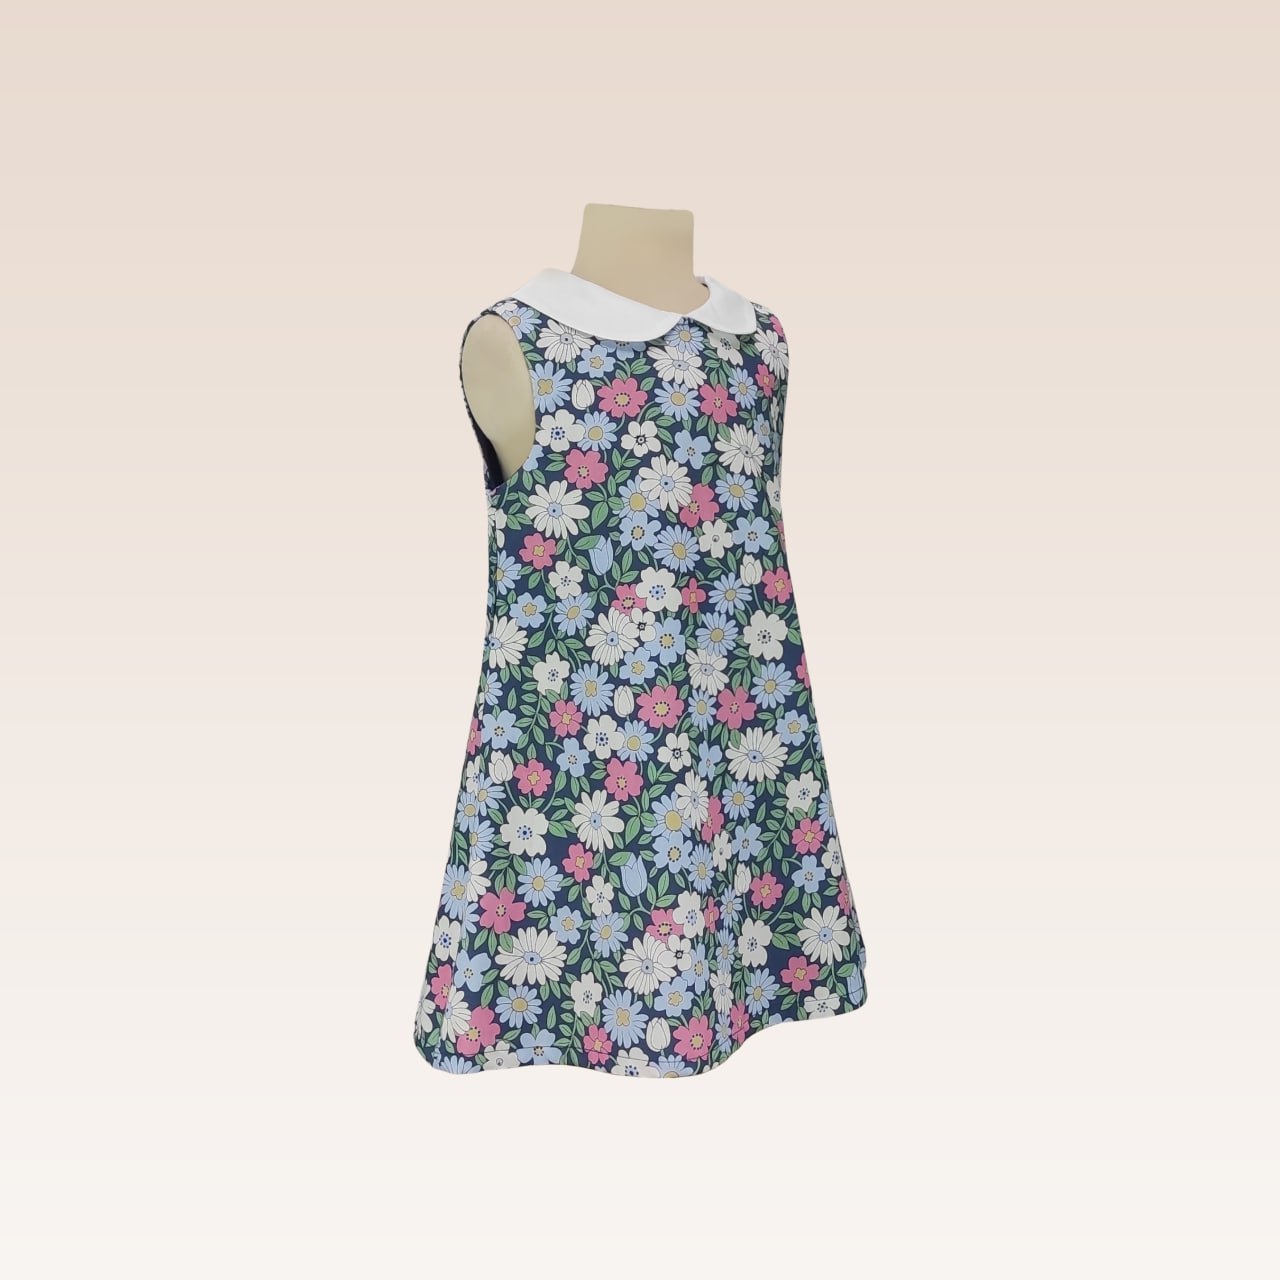 Ellaine Girls Printed Floral Navy Shift Dress with Collar